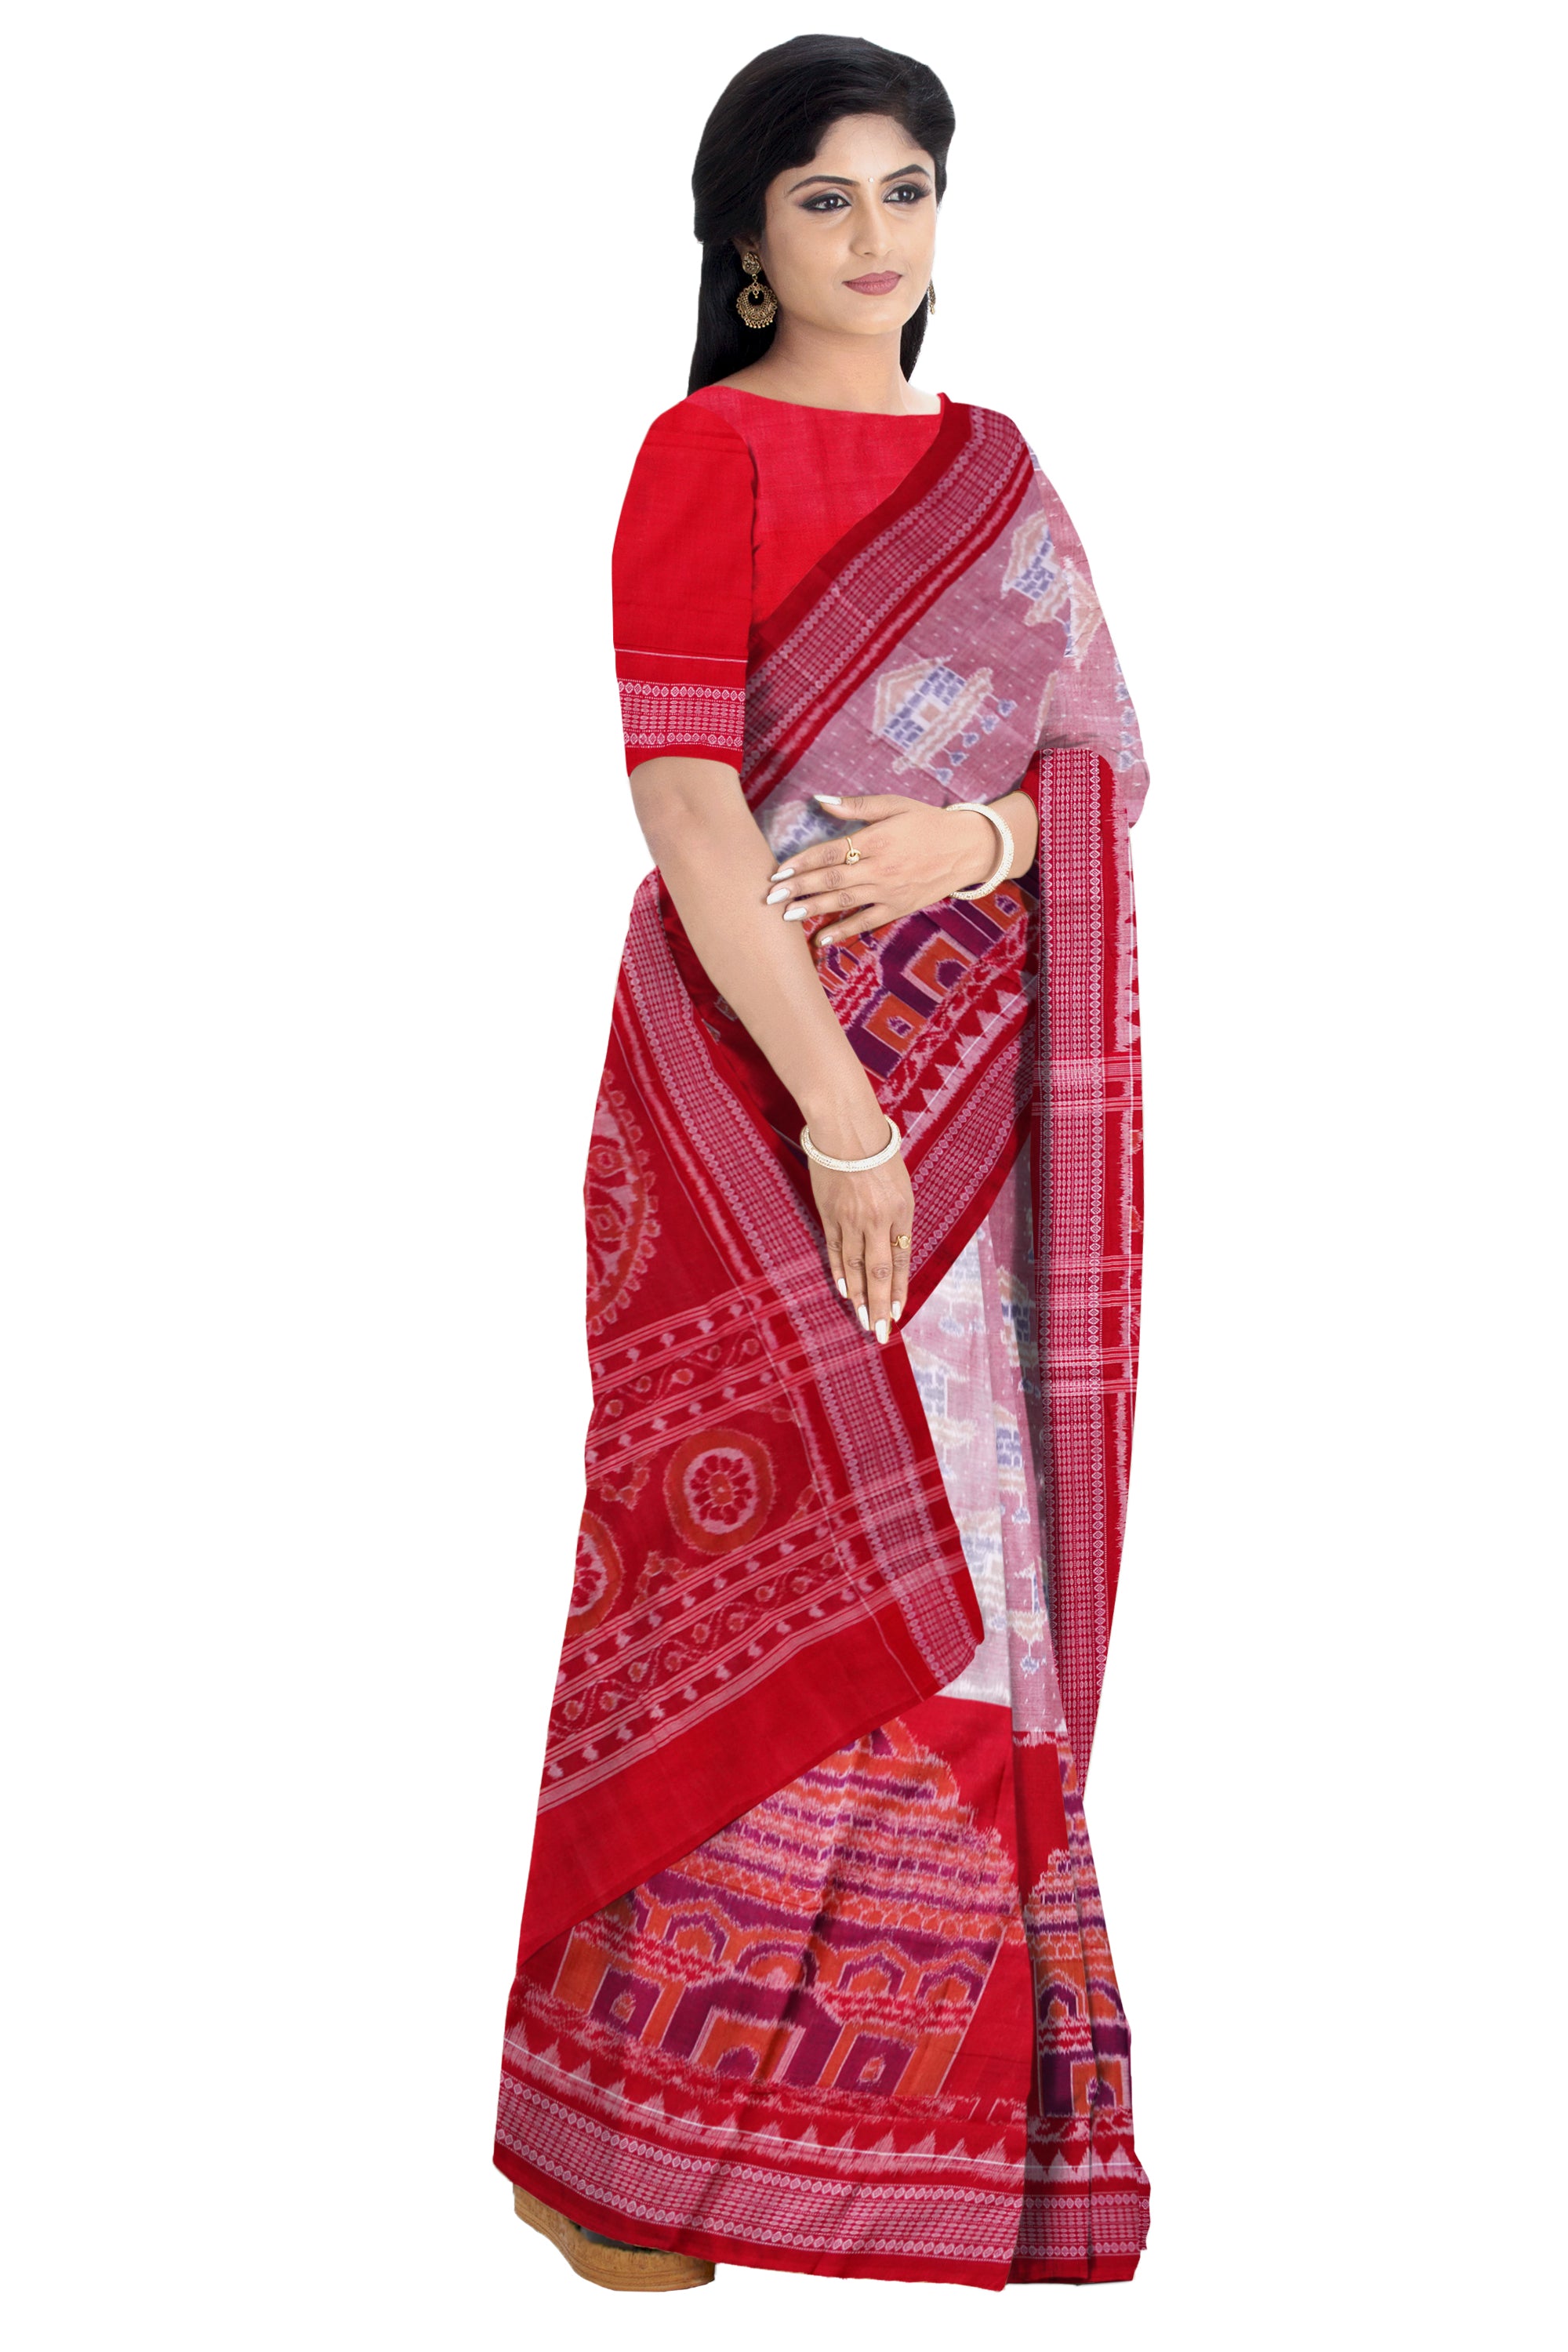 Konark desiged on whole body in Red and white colour, pallu design is based on traditional flower pattern cotton saree. - Koshali Arts & Crafts Enterprise